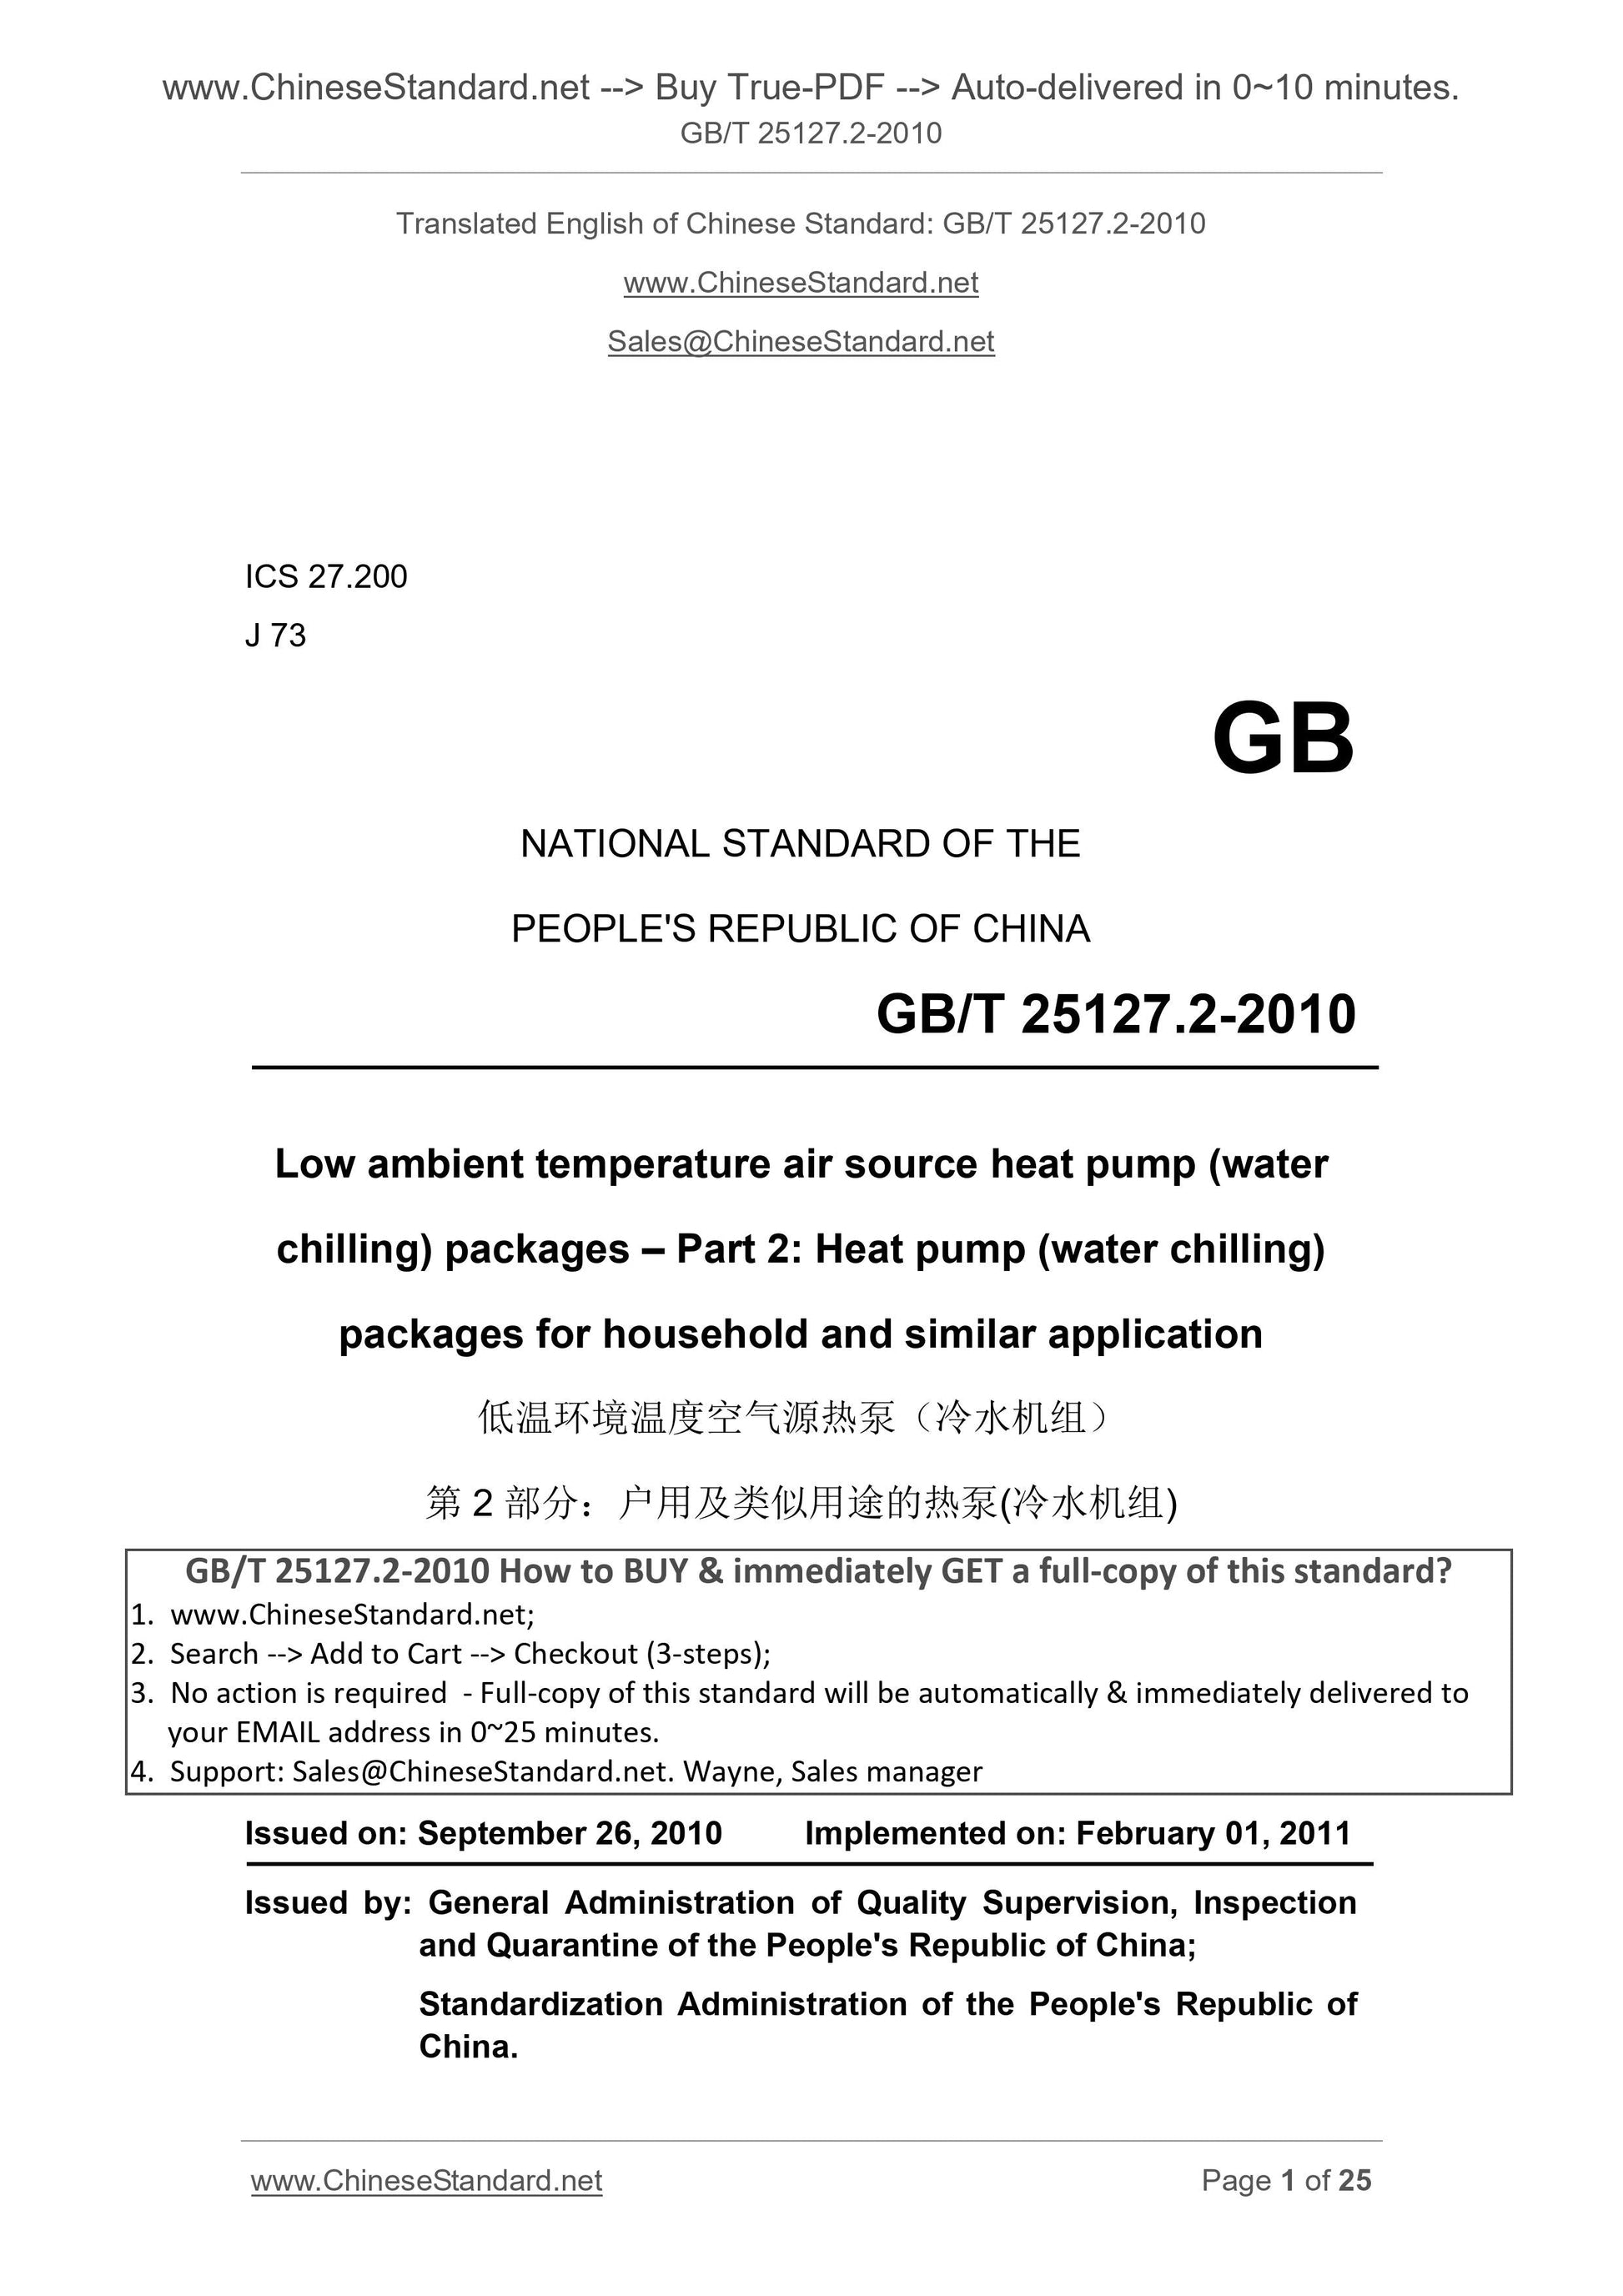 GB/T 25127.2-2010 Page 1